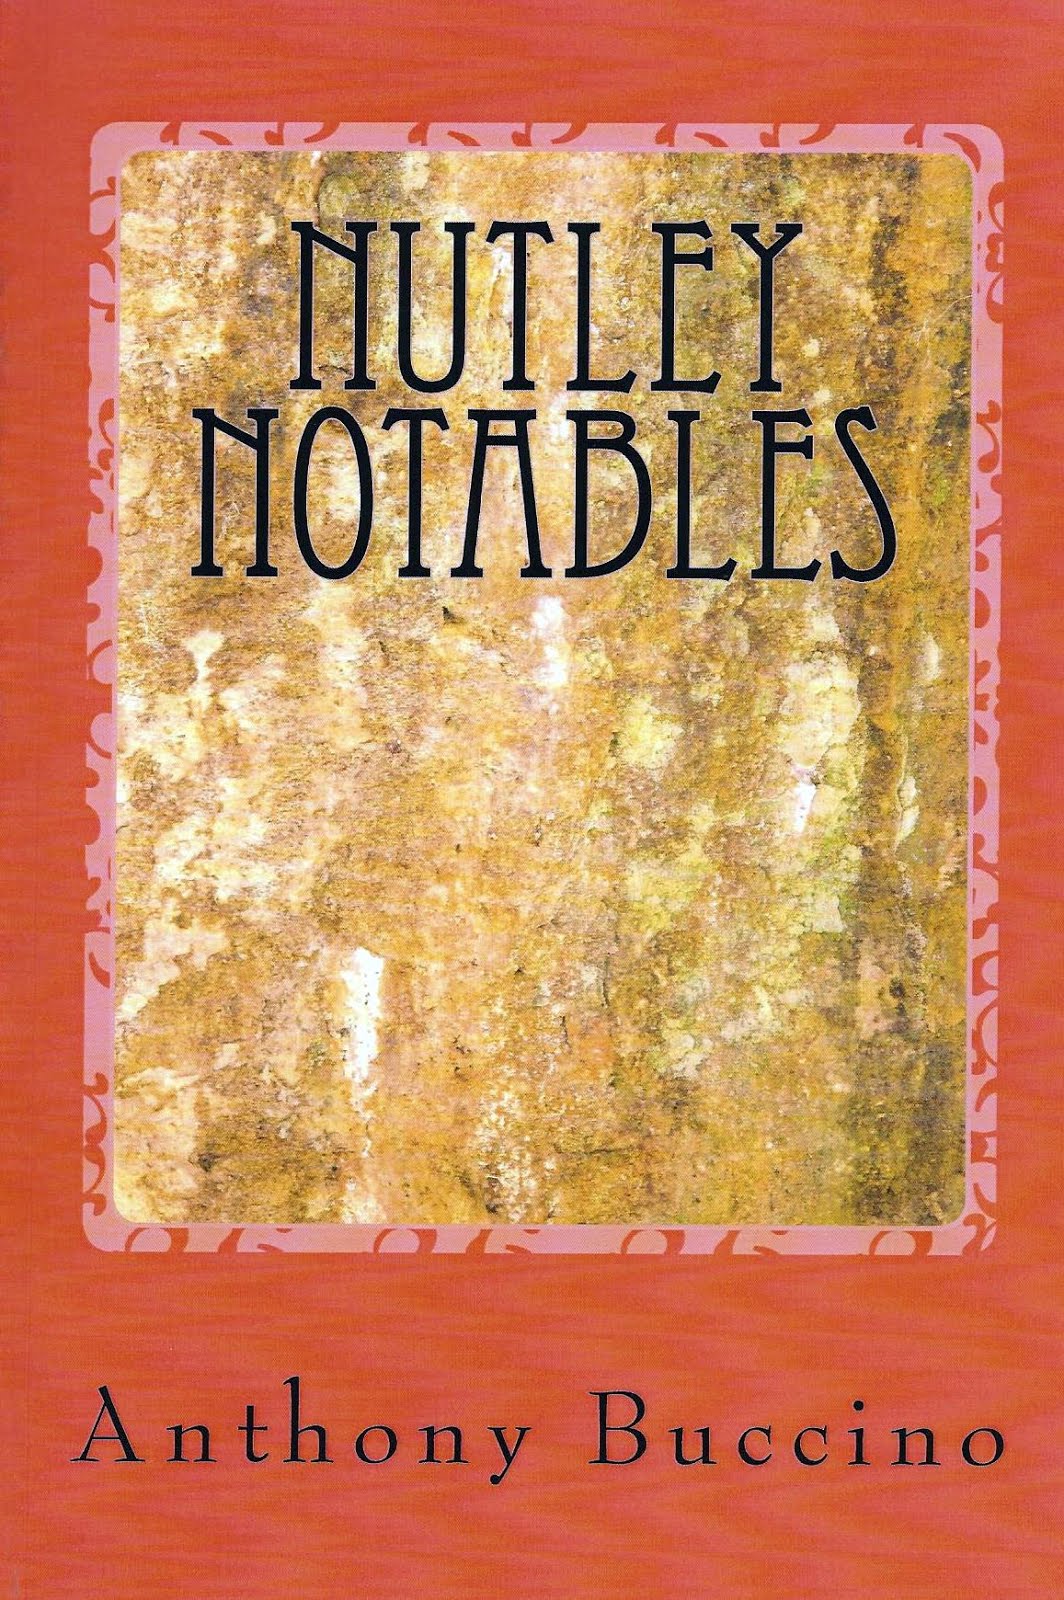 Nutley Notables by Anthony Buccino